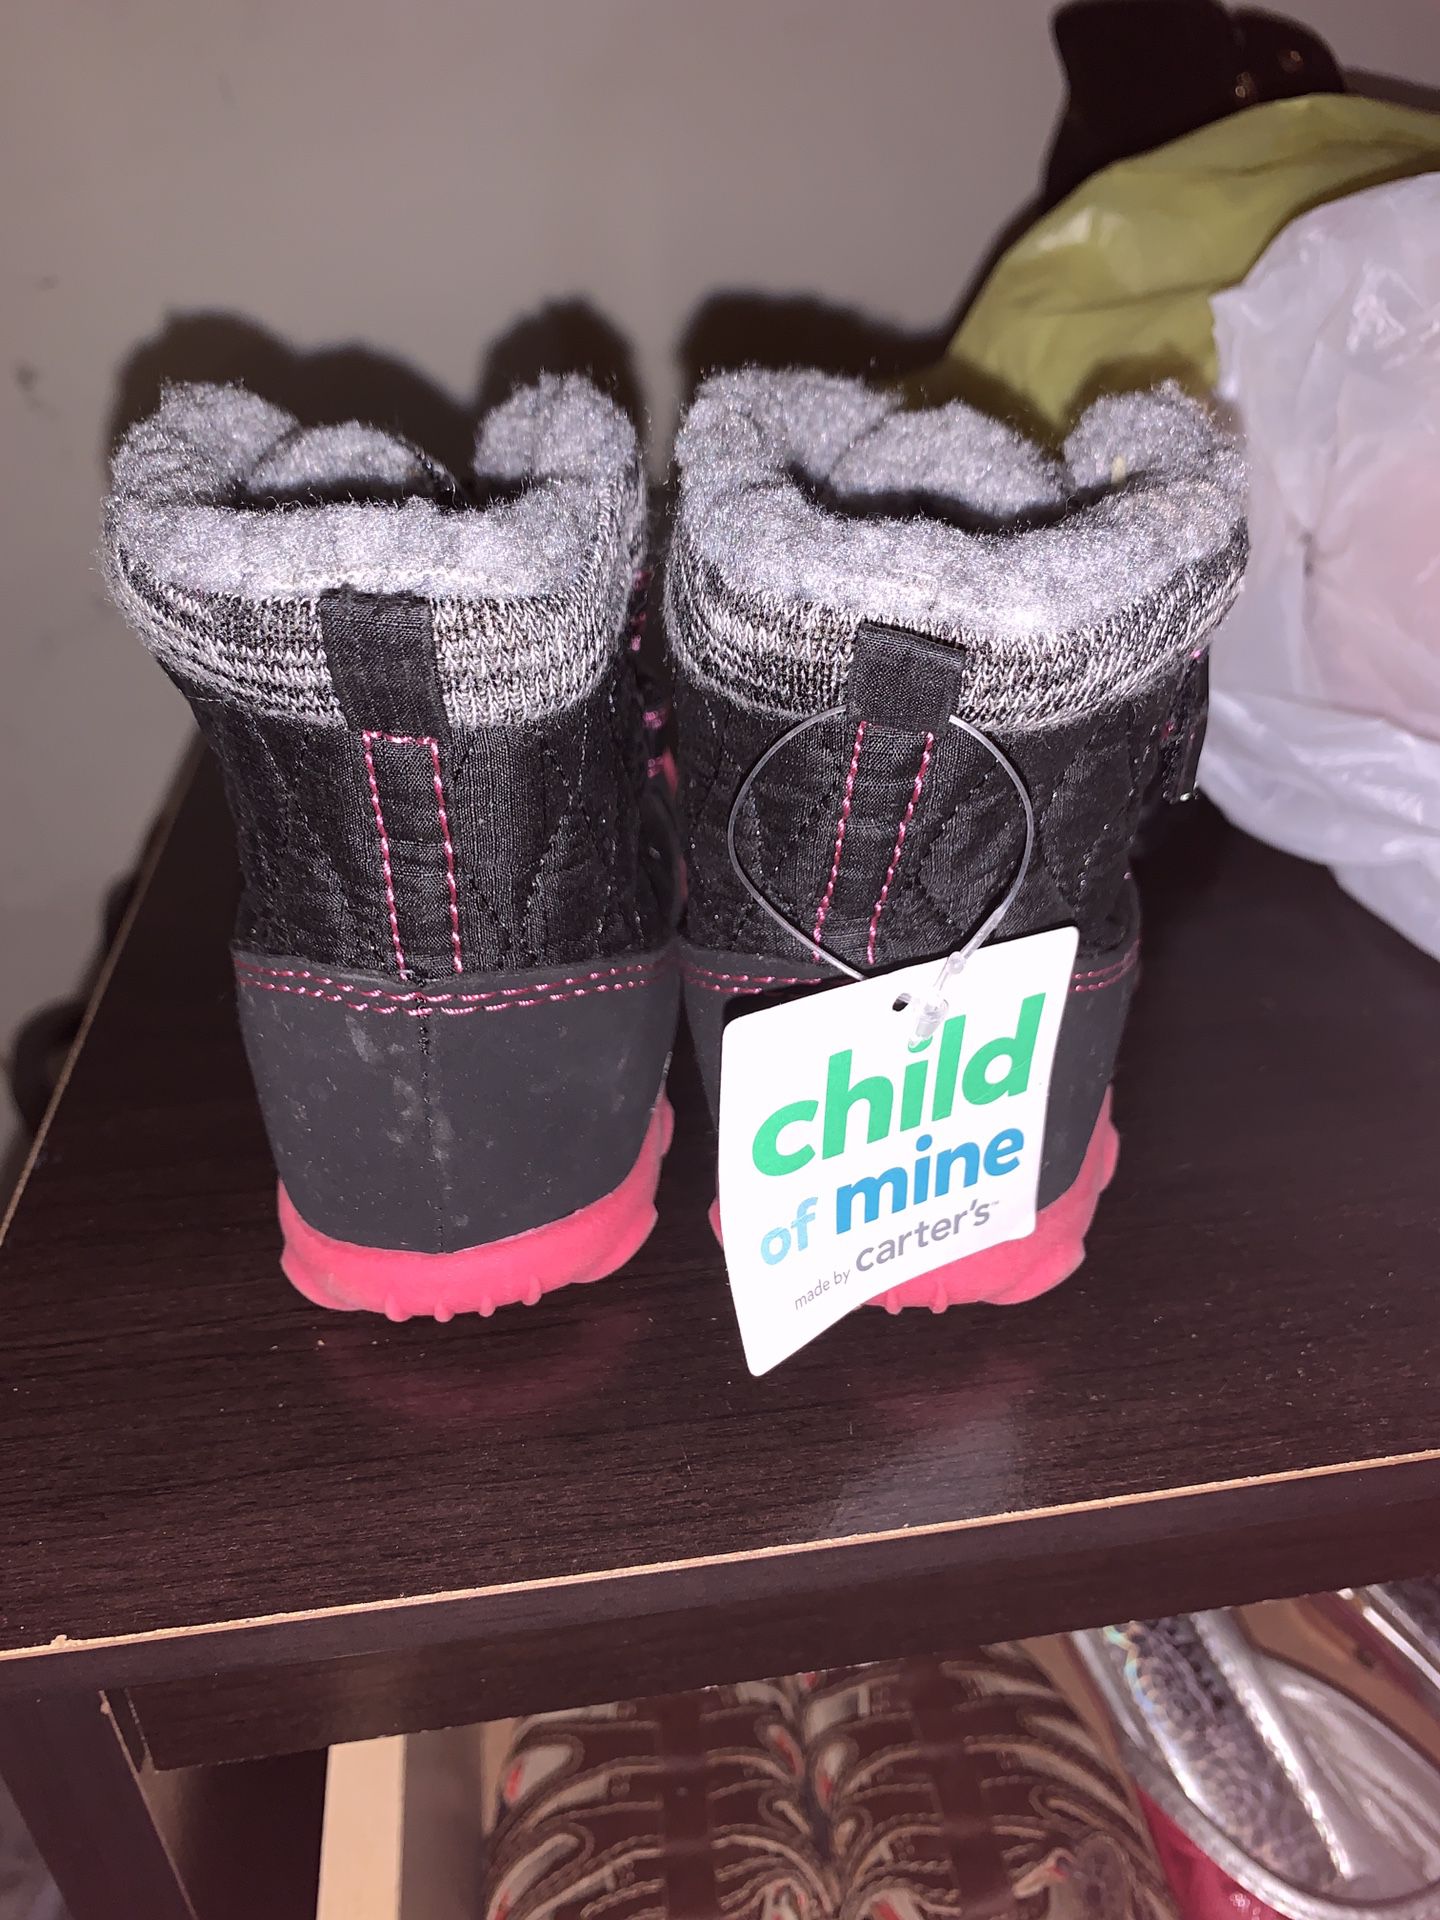 Boots for toddler girls